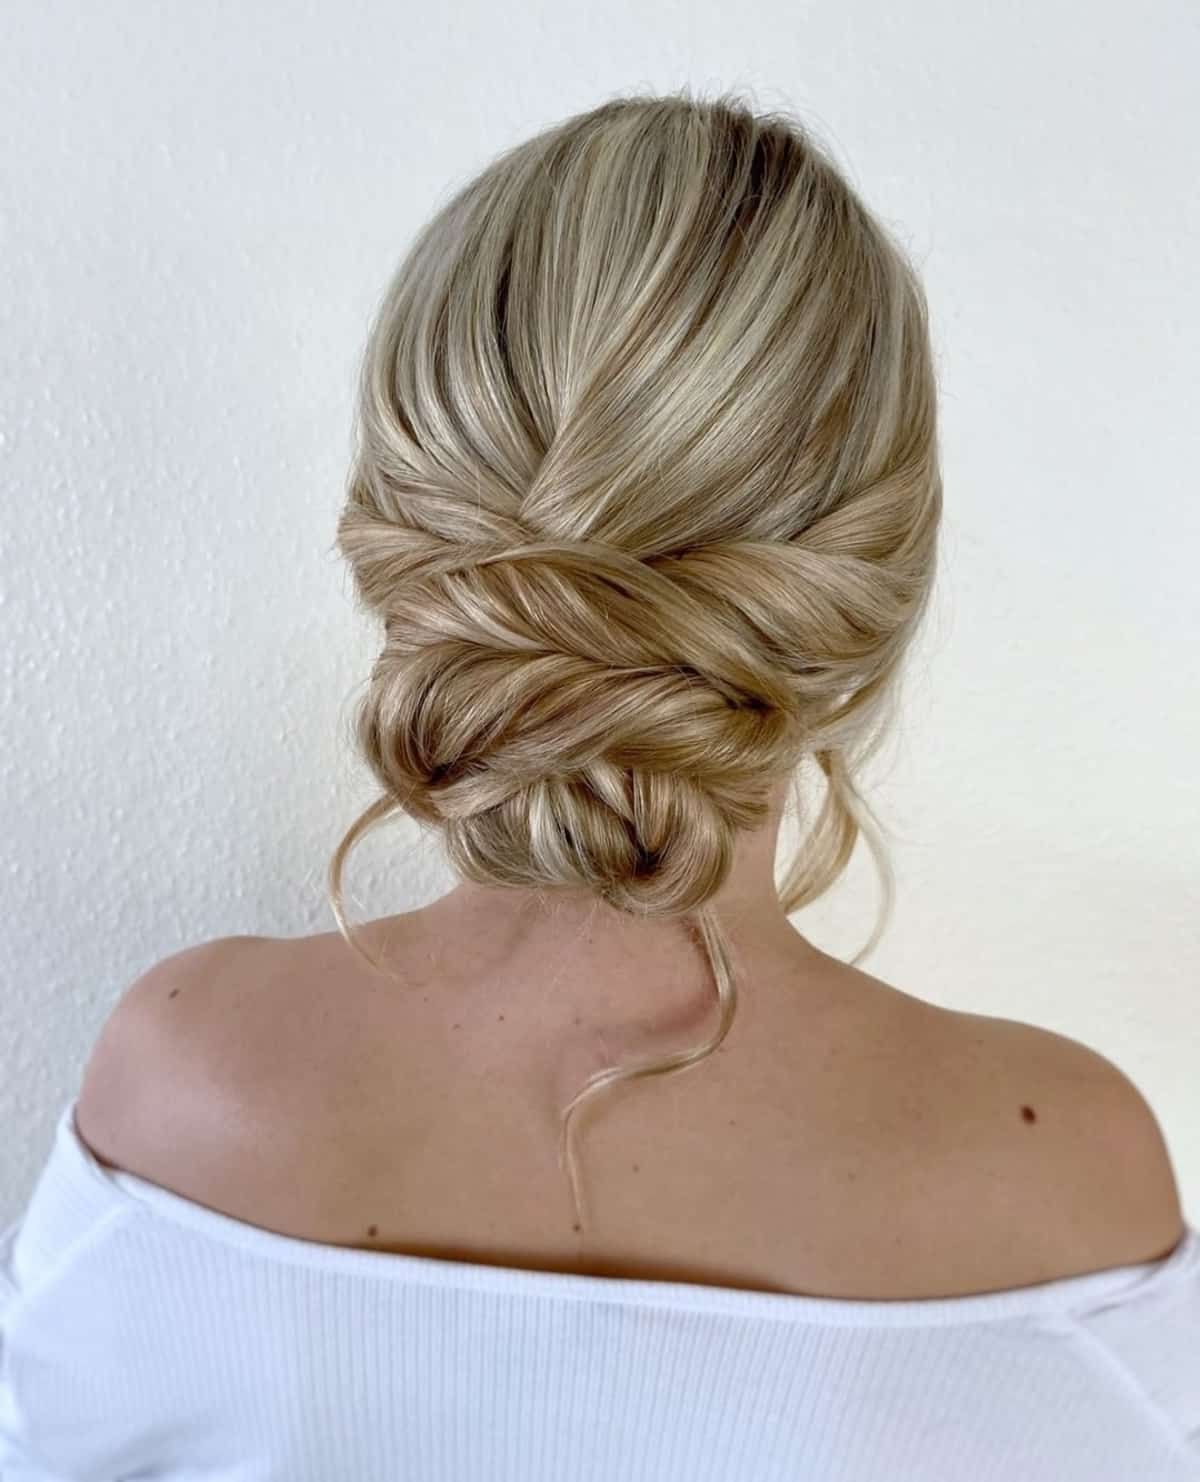 35 Gorgeous Bridesmaid Hairstyles For The Brides Big Day With Bridesmaid’s Updo For Long Hair (View 12 of 25)